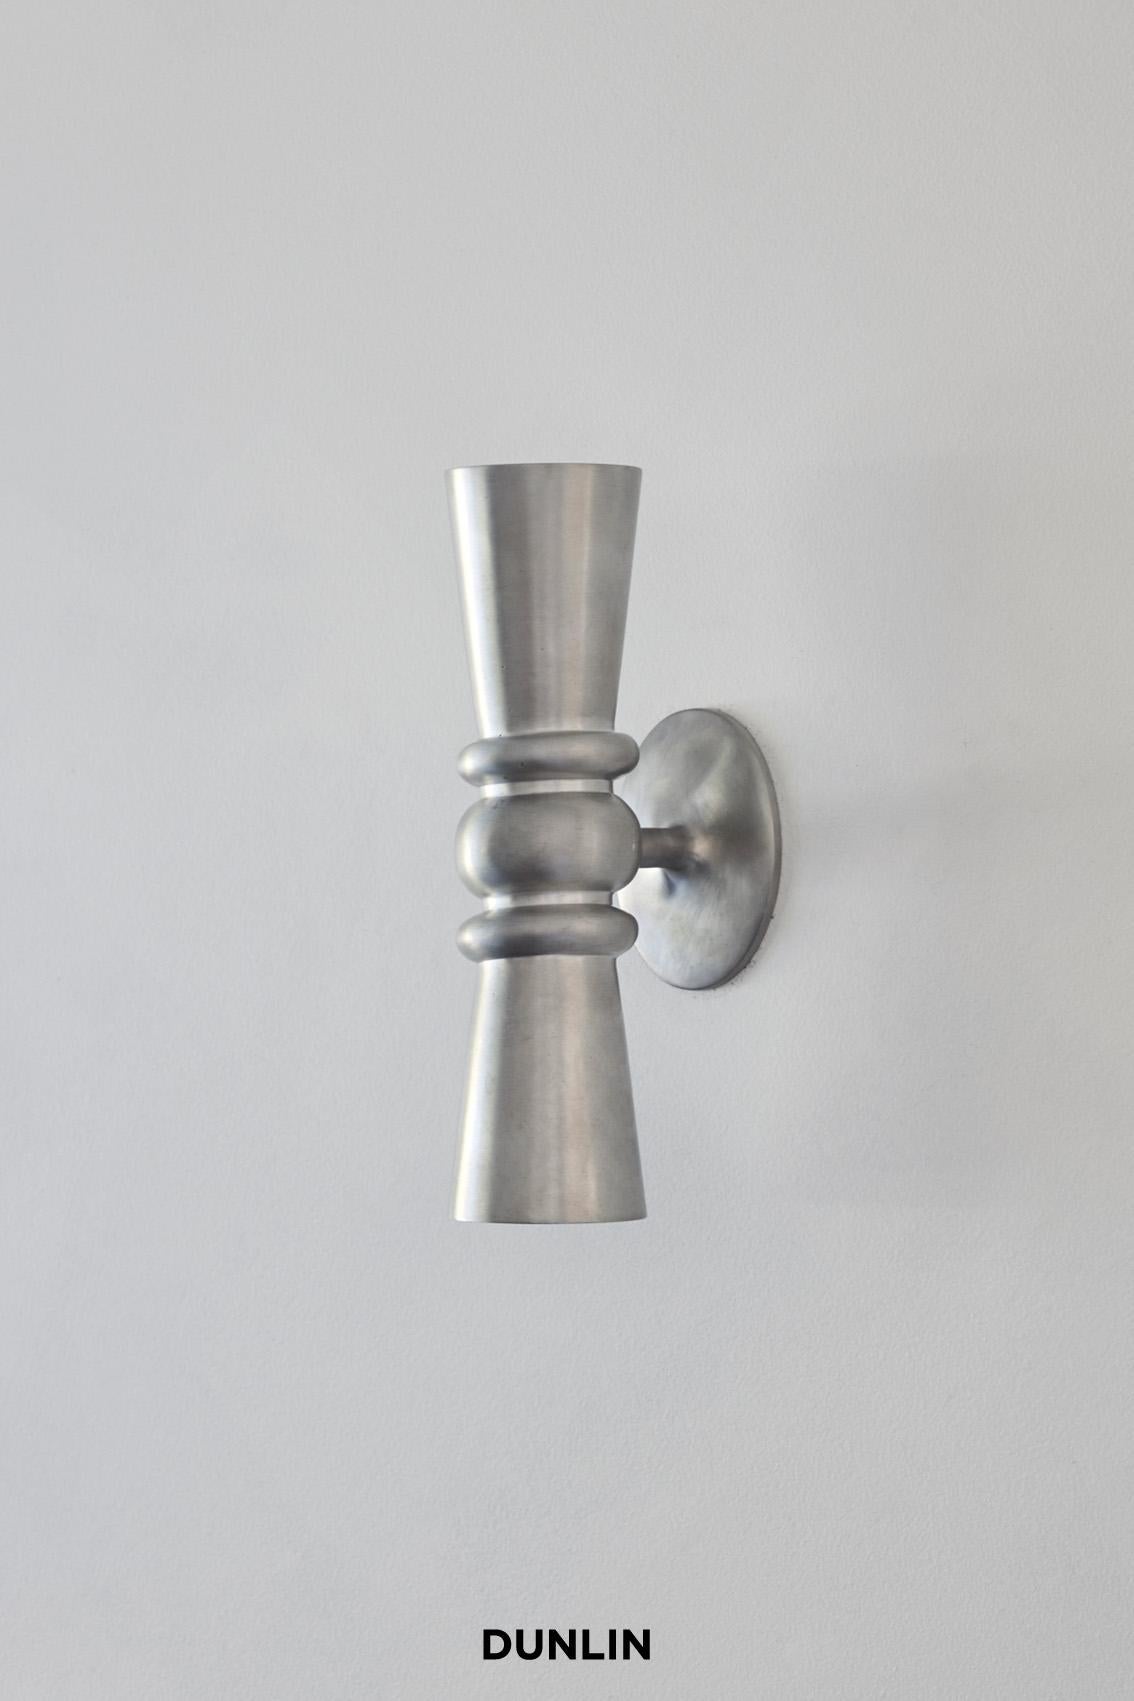 Handmade in solid brass exclusively for Dunlin. 

The Dunlin Germaine Weathered Brass Up-Down Wall Light exudes an elegant and charming presence, adding a touch of sophistication to any living room. Its meticulous craftsmanship, with a keen focus on